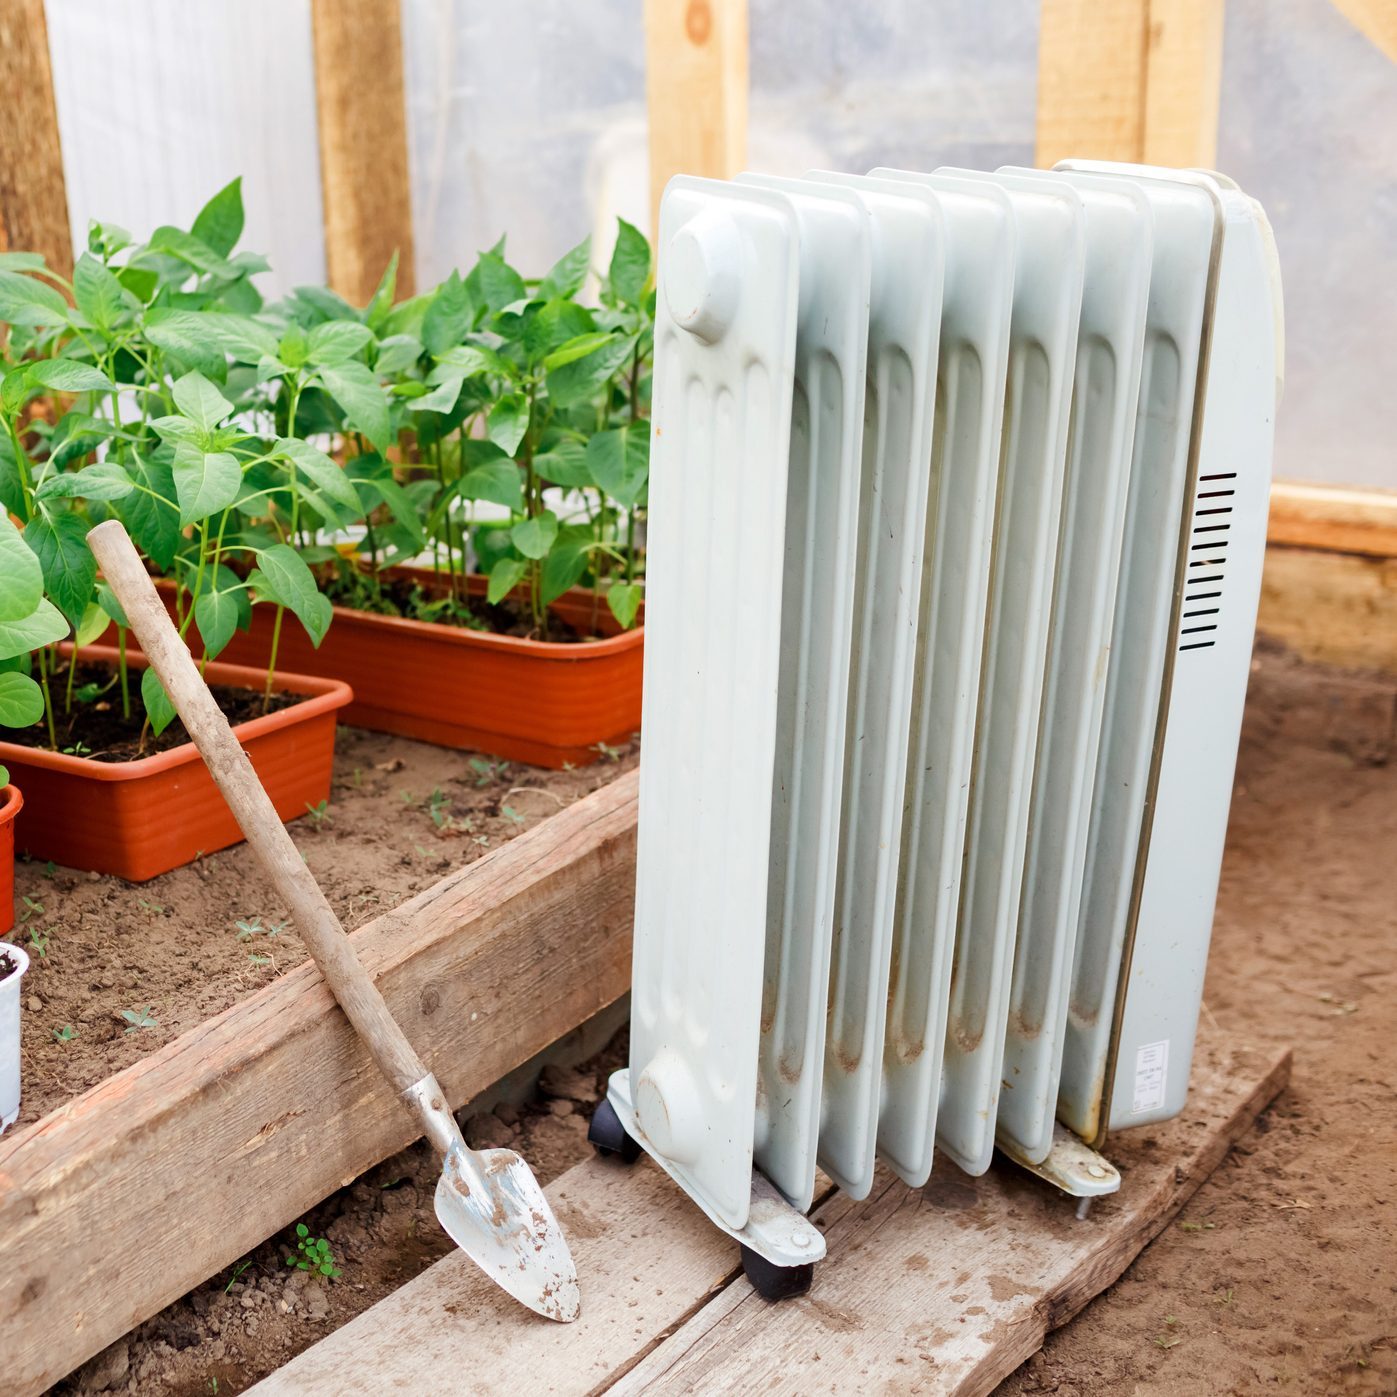 Electric oil heater in greenhouse with seedlings of plants, planting